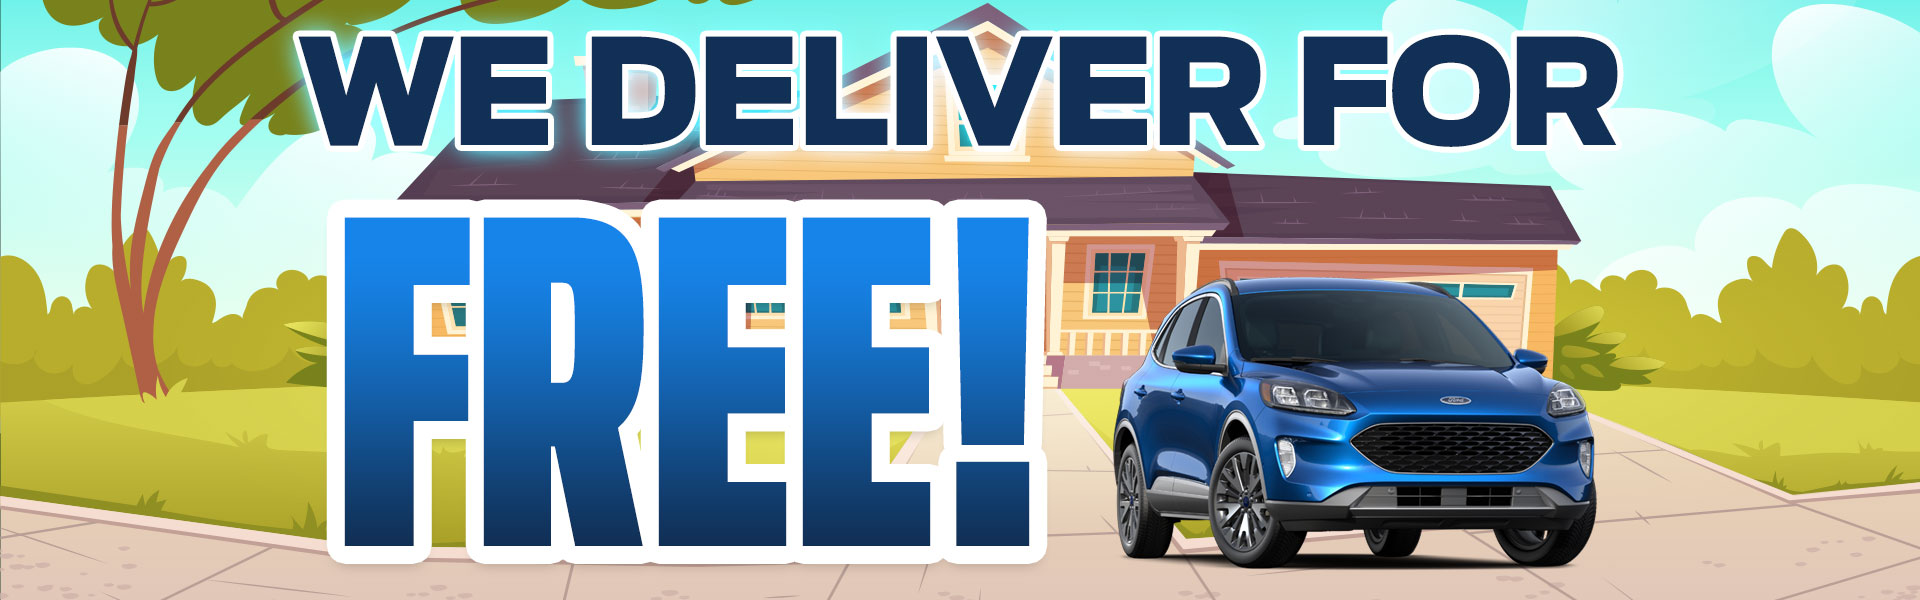 We Deliver For Free!